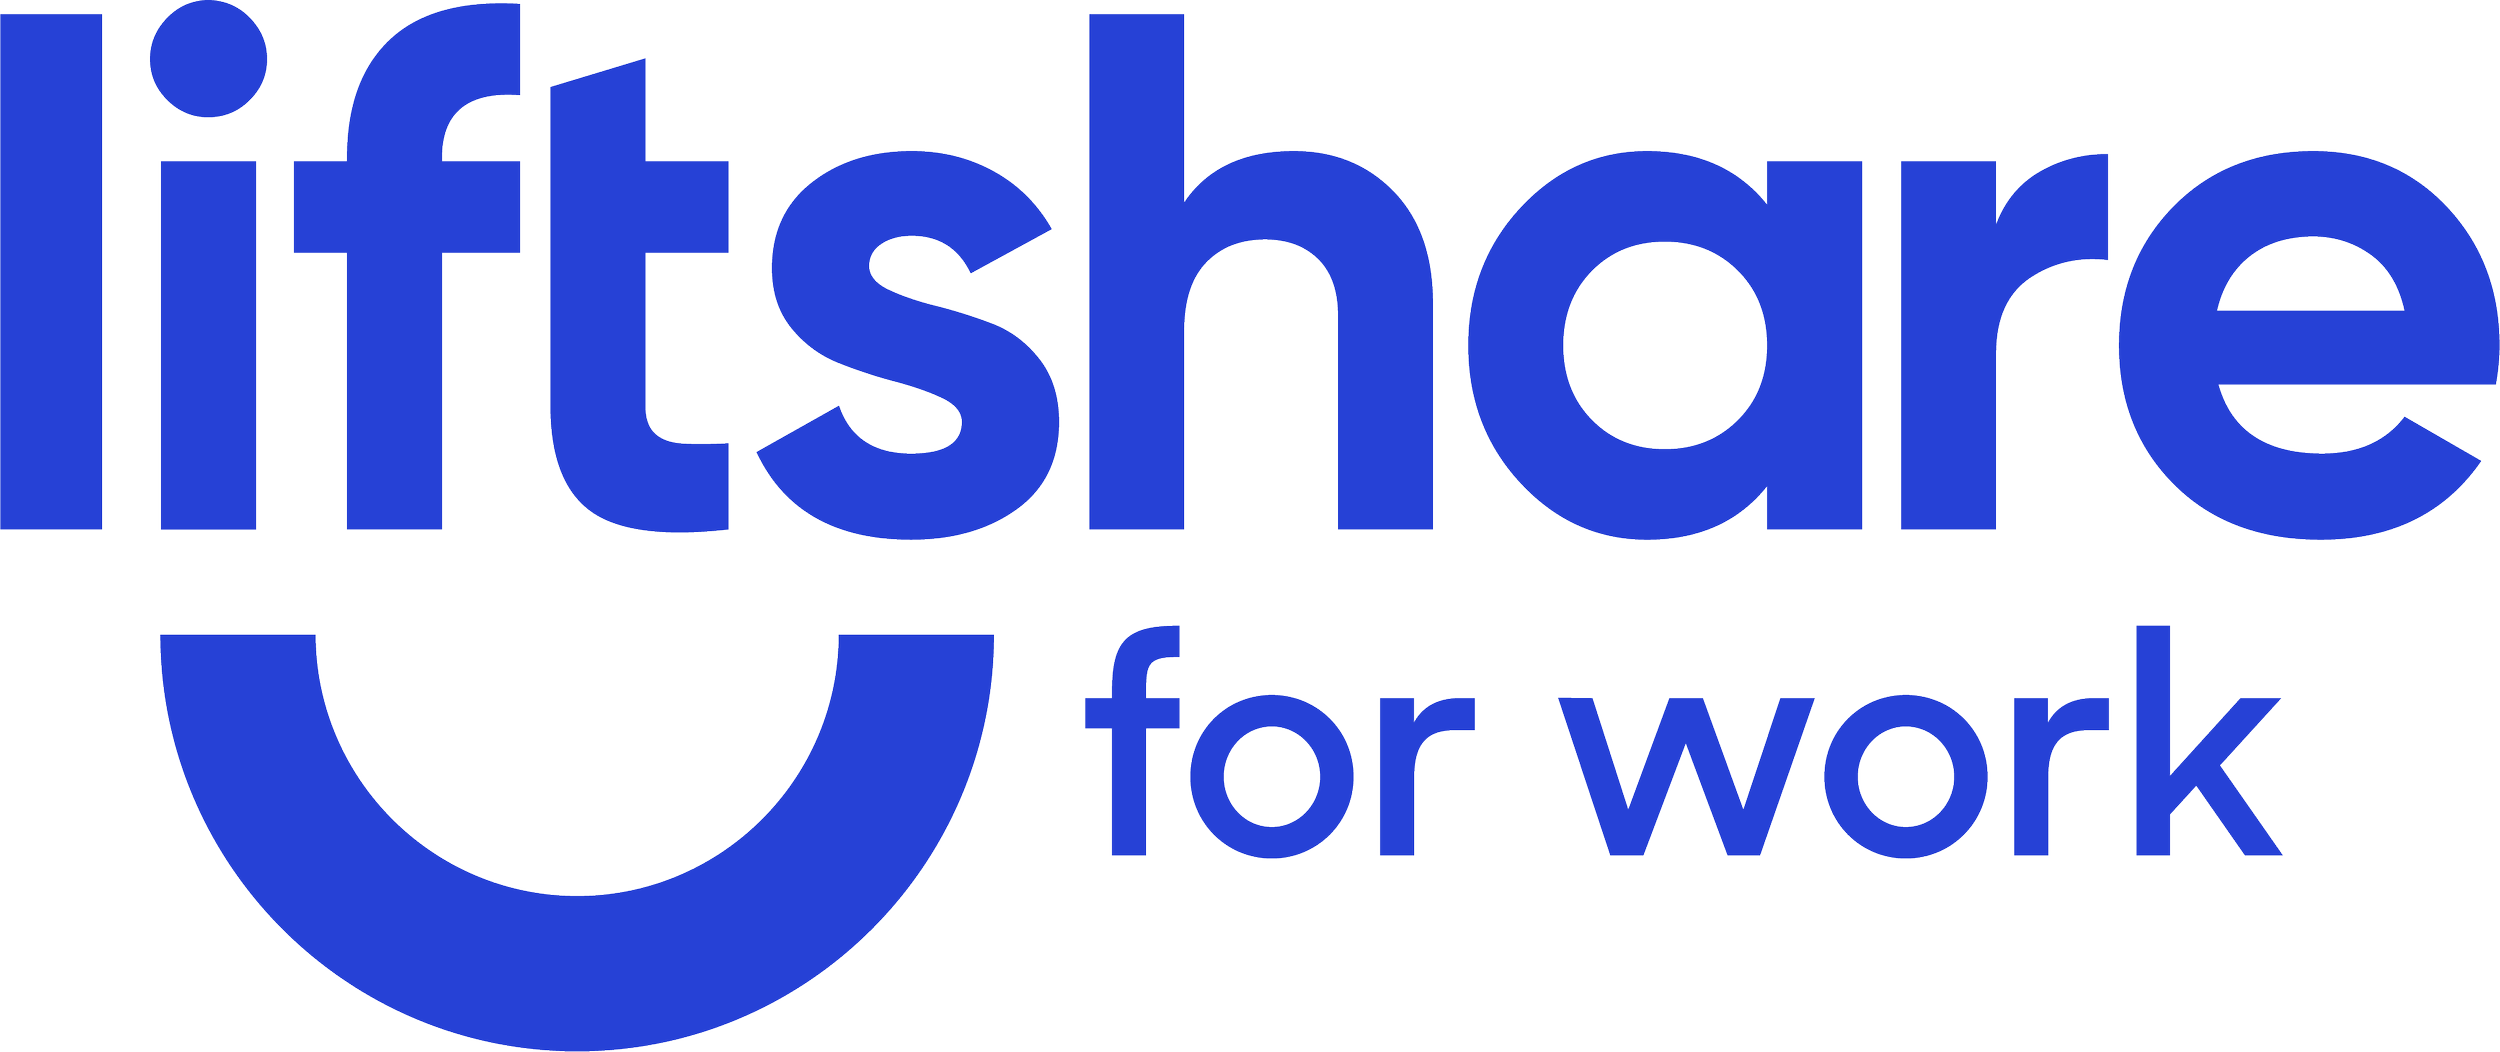 Liftshare_For_Work_Blue_RGB.png